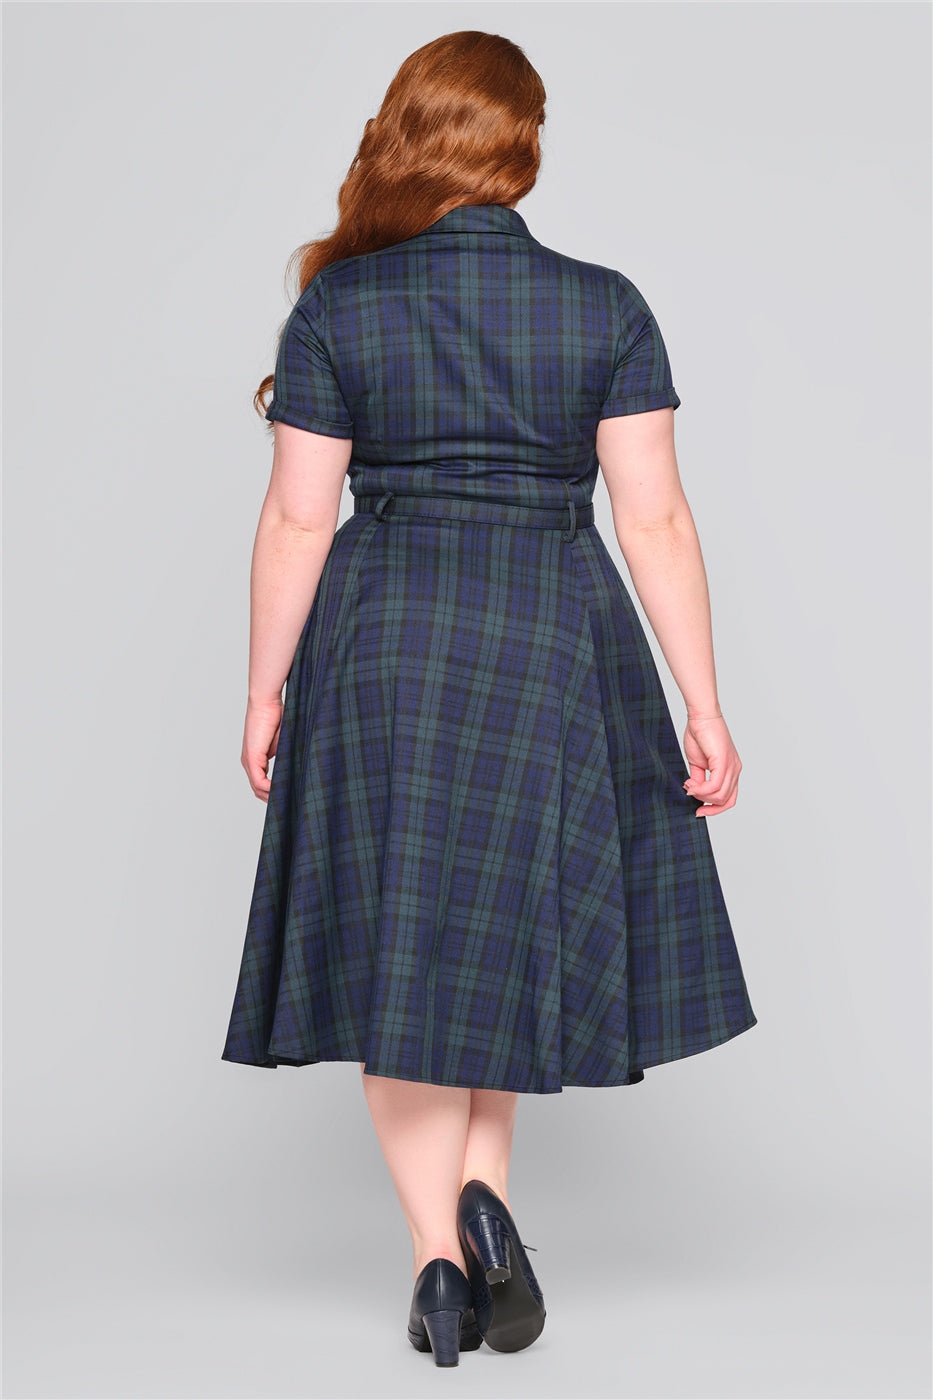 Caterina Blackwatch Check Swing Dress by Collectif